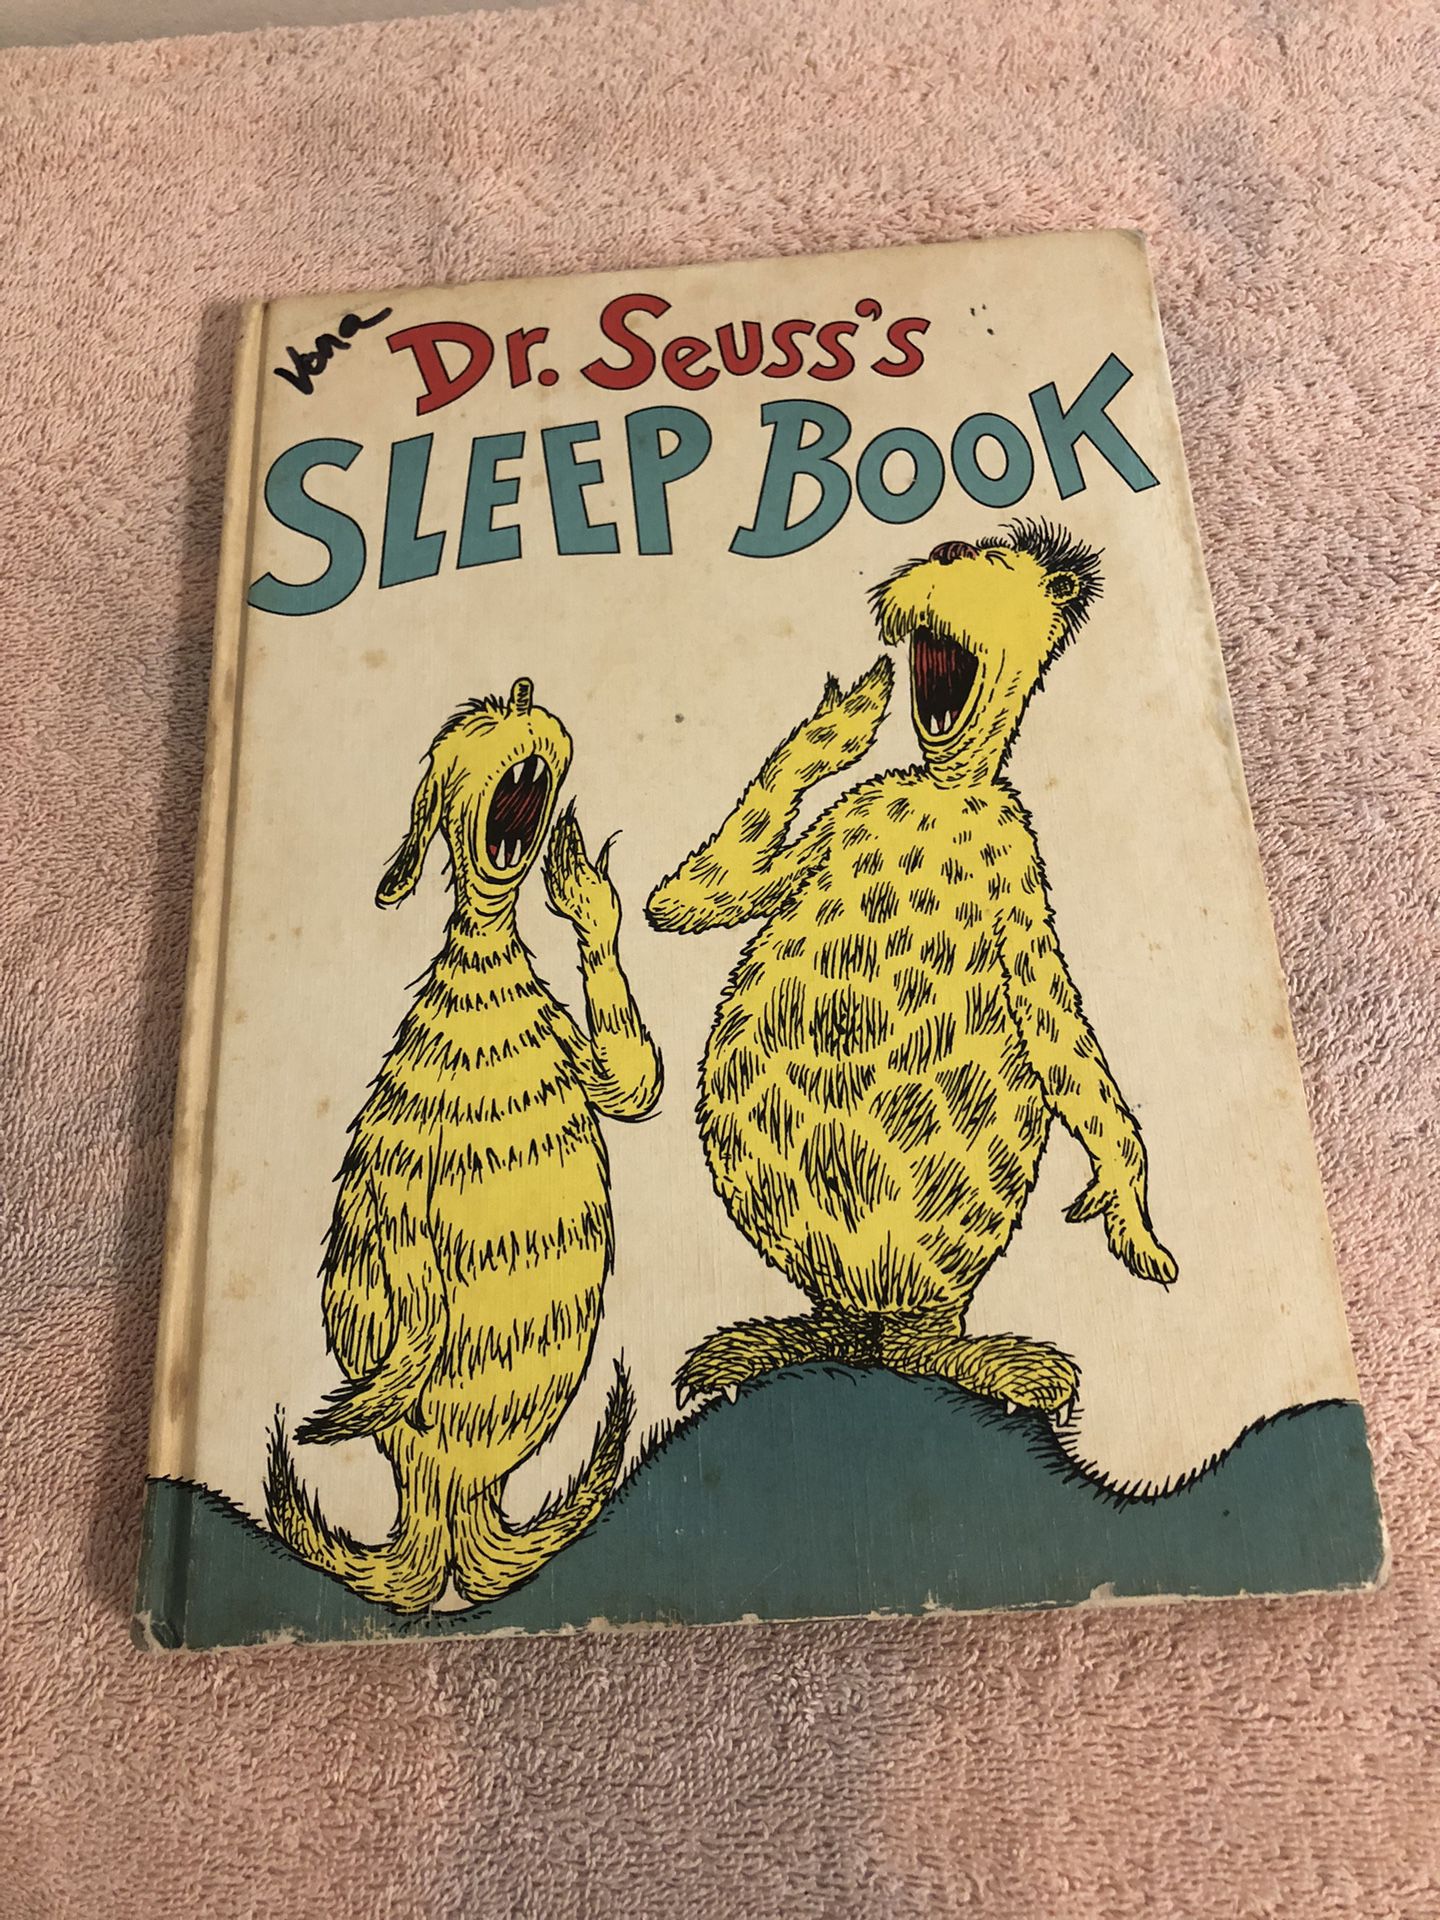 Vintage 1962 First Edition Dr Seuss The Sleep Book Hardcover 11”x8”